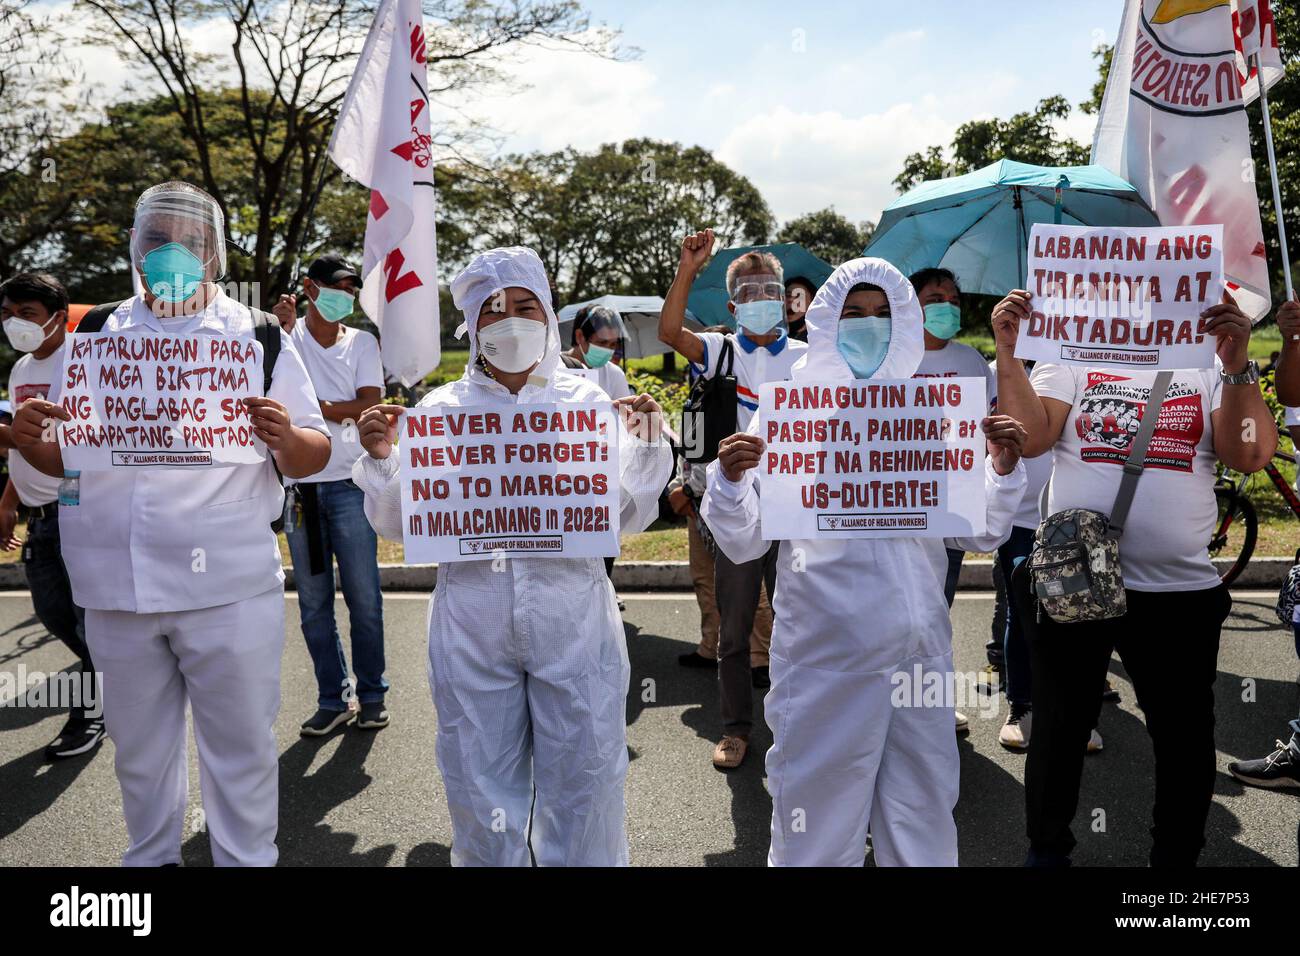 Health workers wearing protective equipment carry signs during a protest to mark the 73rd International Human Rights Day at the University of the Philippines in Quezon City, Metro Manila. Thousands of activists from various groups rallied against the implementation of the controversial anti-terror law and alleged human rights violations, including attacks on media workers and alleged extrajudicial killings in President Duterte's crackdown against illegal drugs. Philippines. Stock Photo